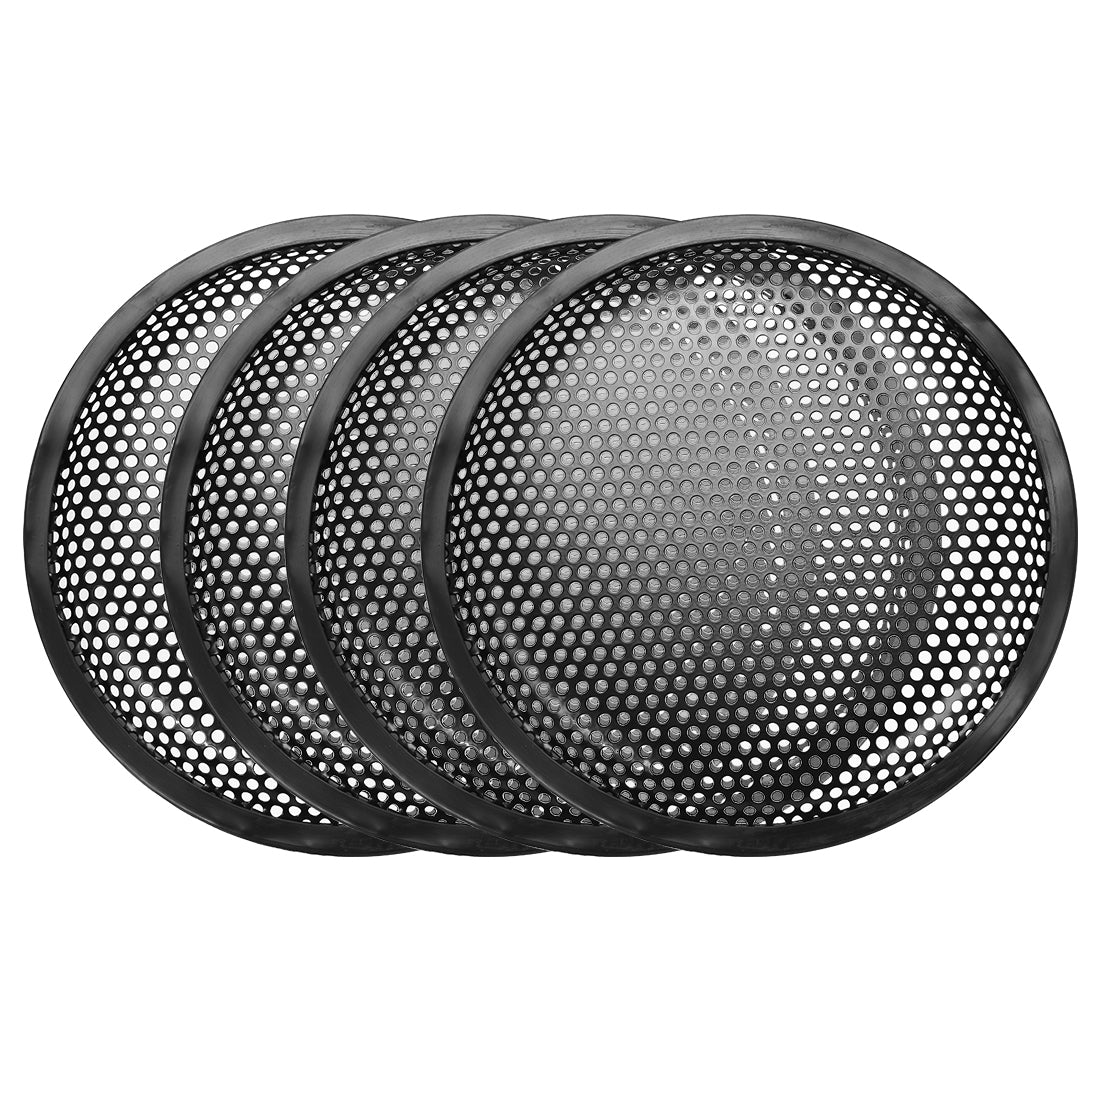 uxcell Uxcell 4pcs 6.5" Speaker Waffle Grill Metal Mesh Audio Subwoofer Guard Protector Cover with Clips,Screws